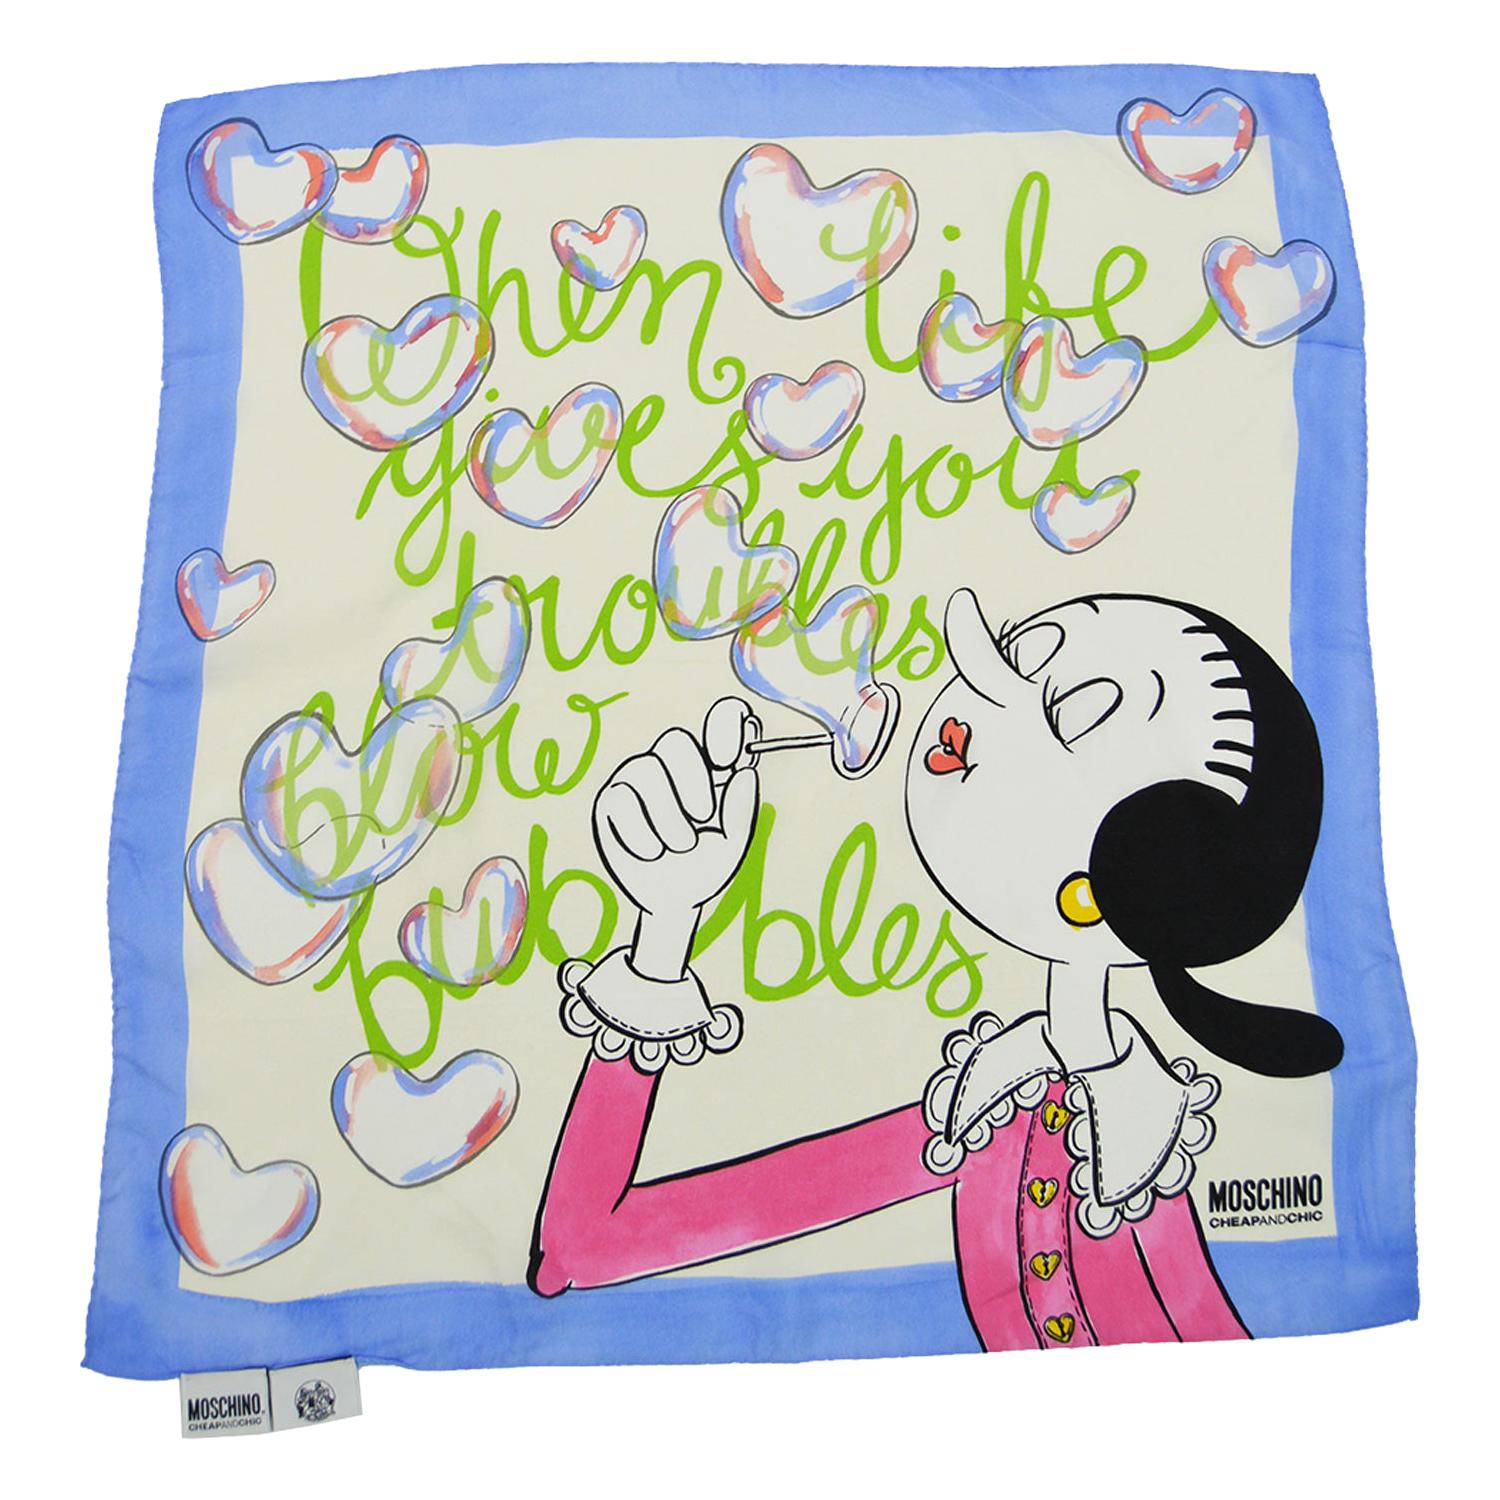 Moschino Olive Oyl 'When Life Gives You Troubles' Printed Silk Square Scarf 